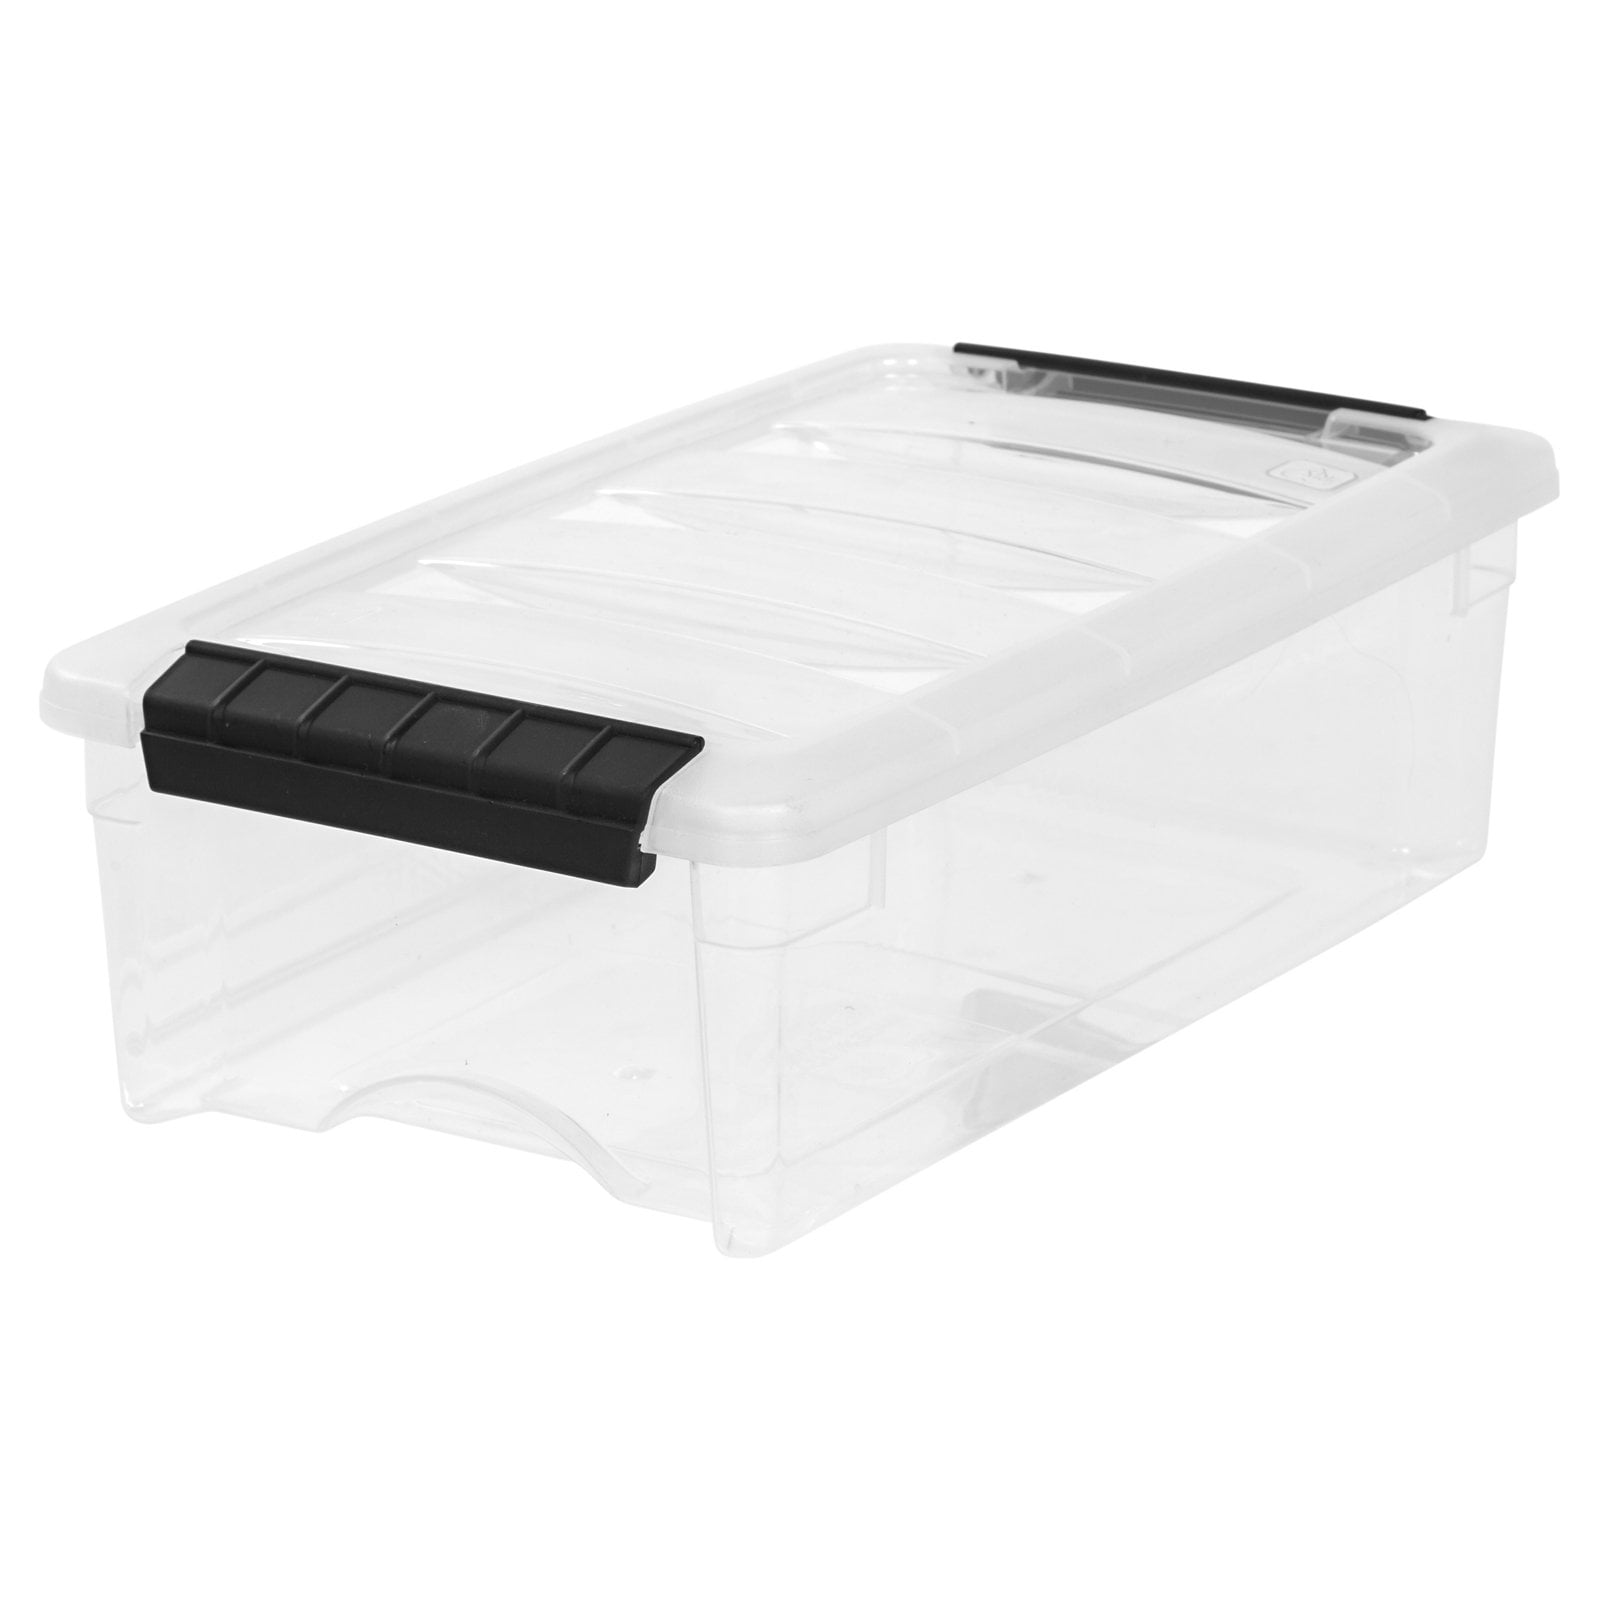 Greenco Clear Foldable Boot Storage Boxes-5 Pack 4 X Pack of 5